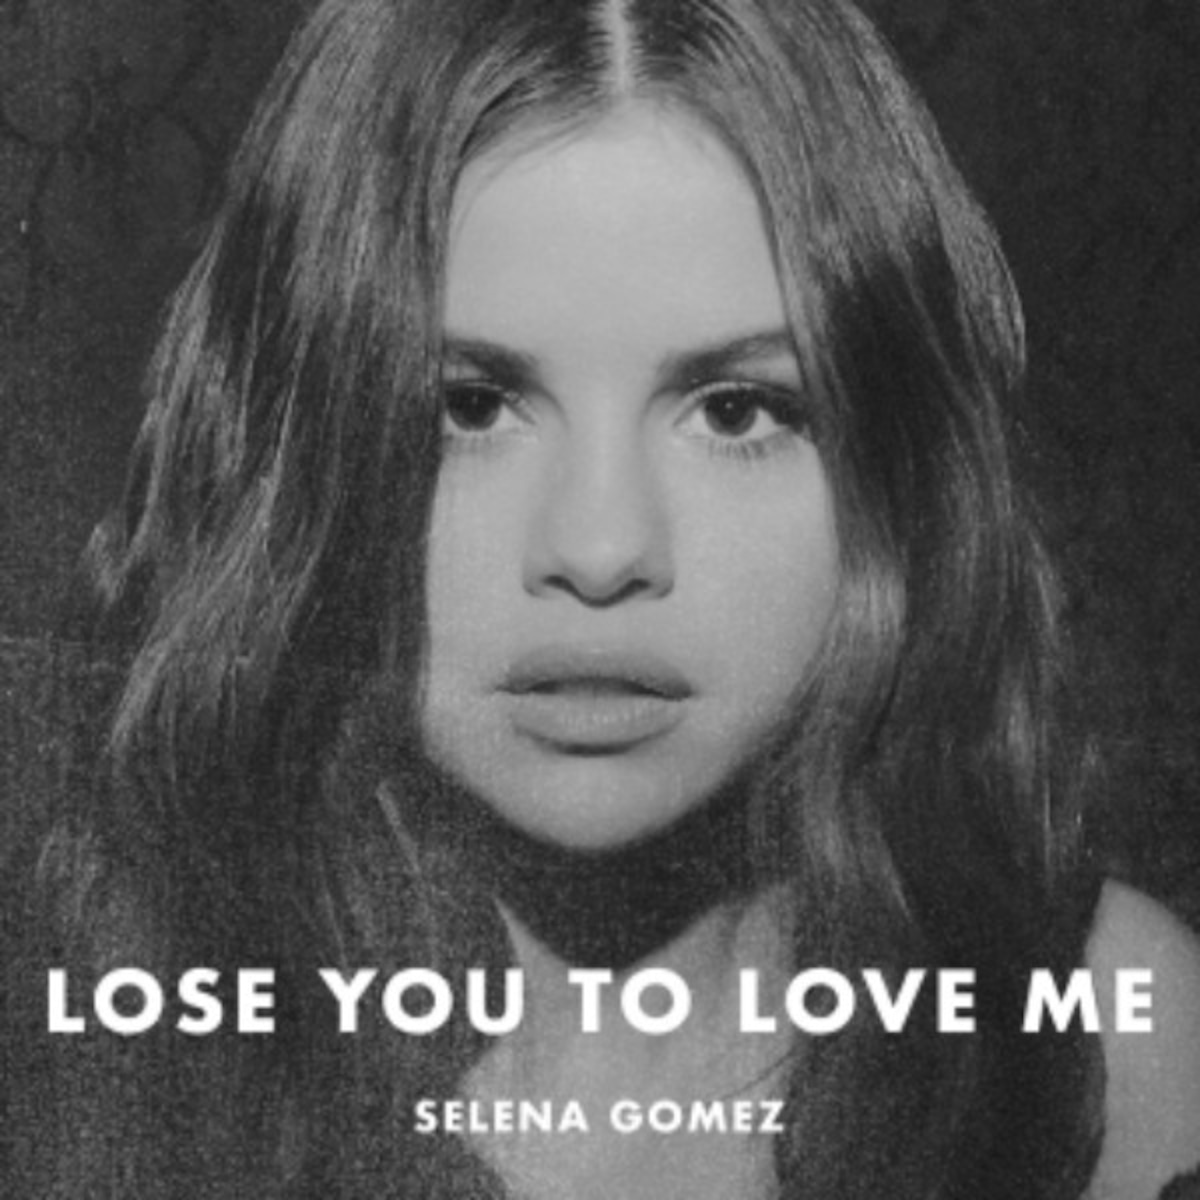 Selena Gomez S Lose You To Love Me Song Lyrics Decoded E News